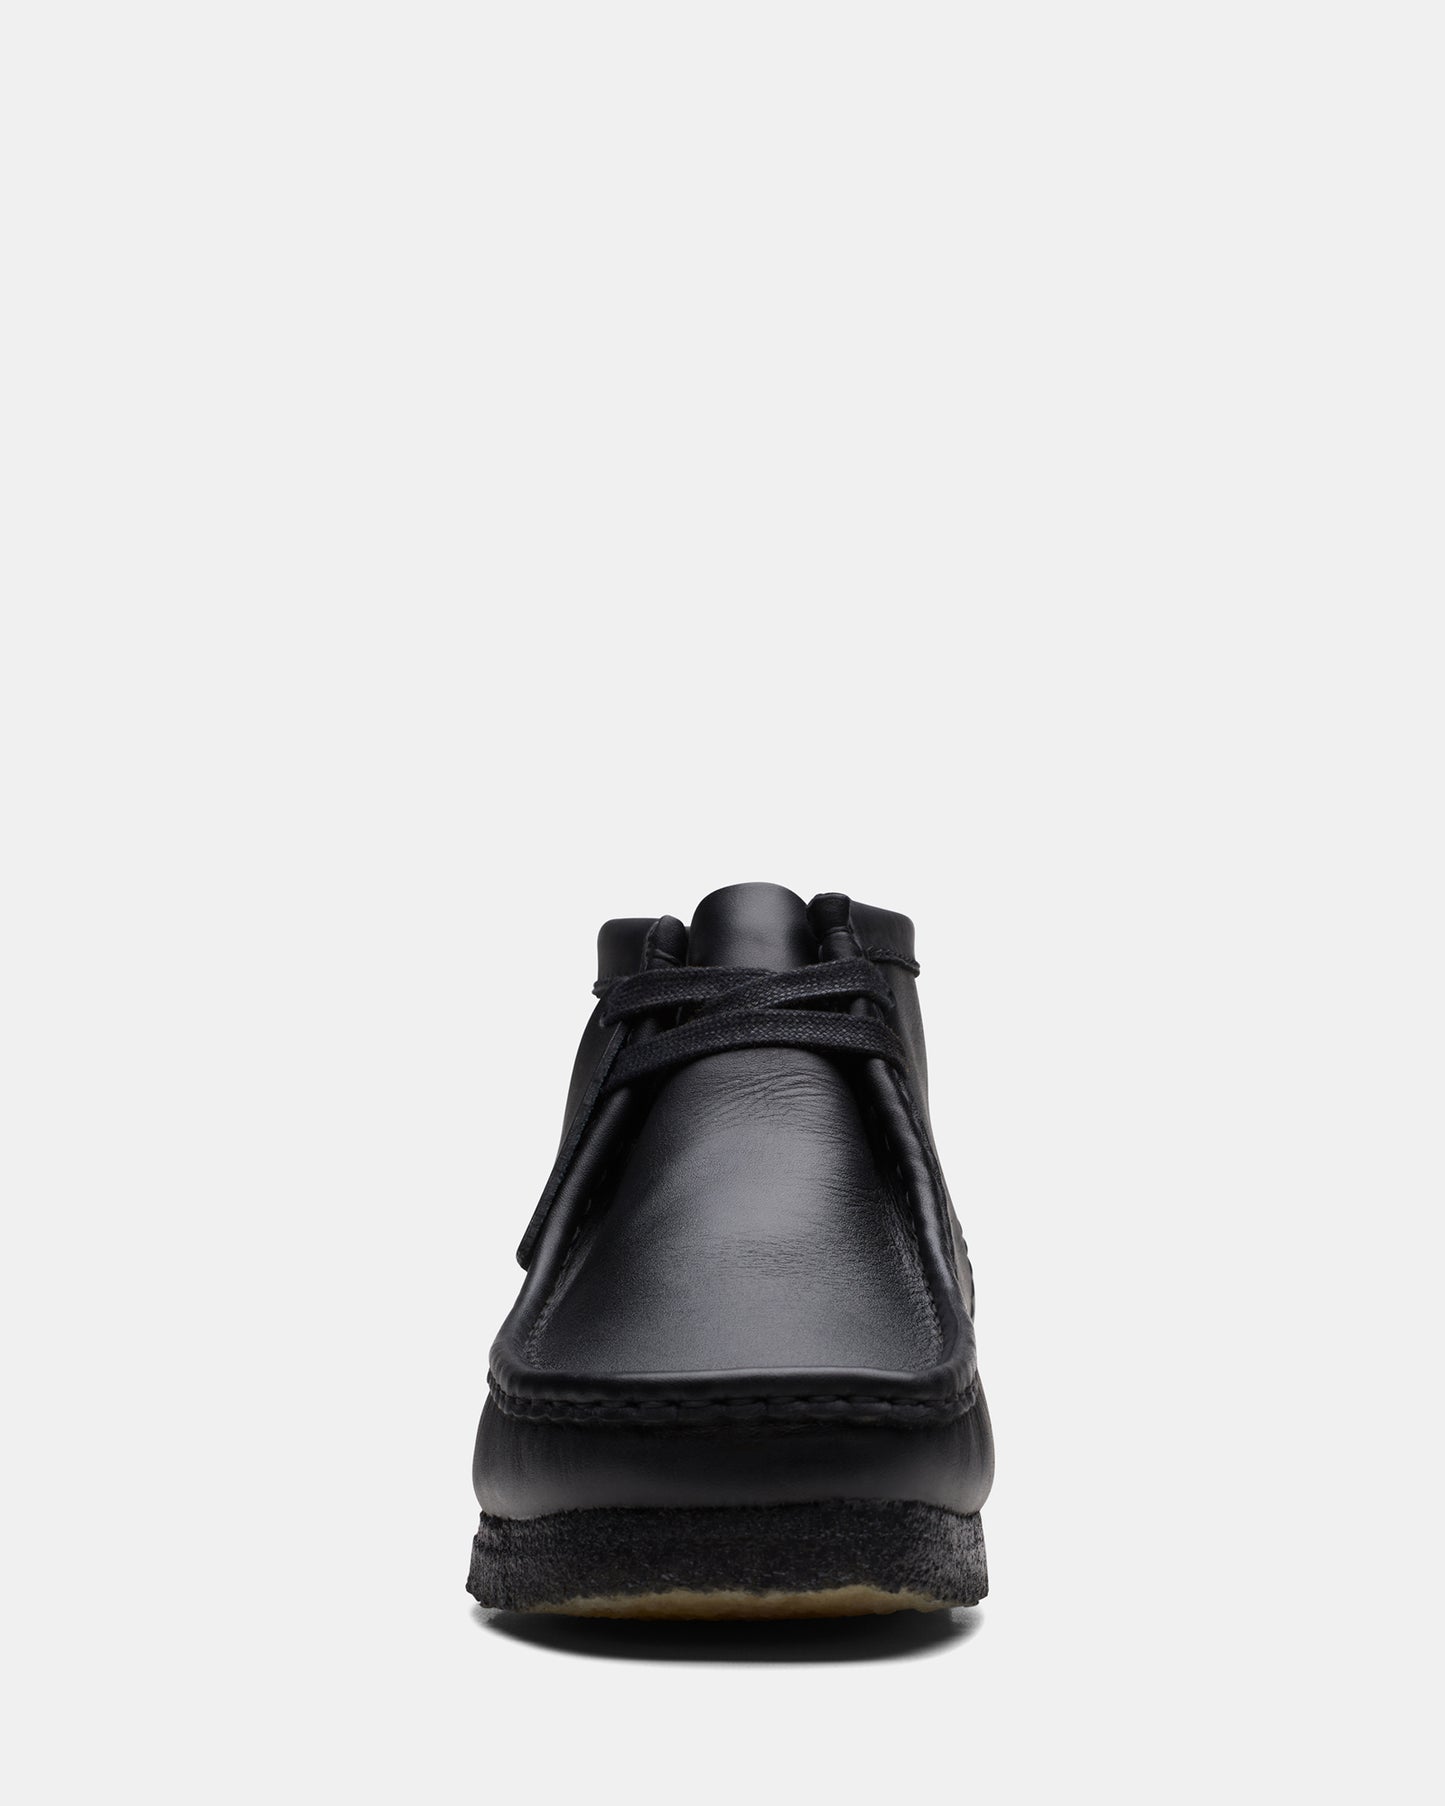 Wallabee Boot (M) Black Leather